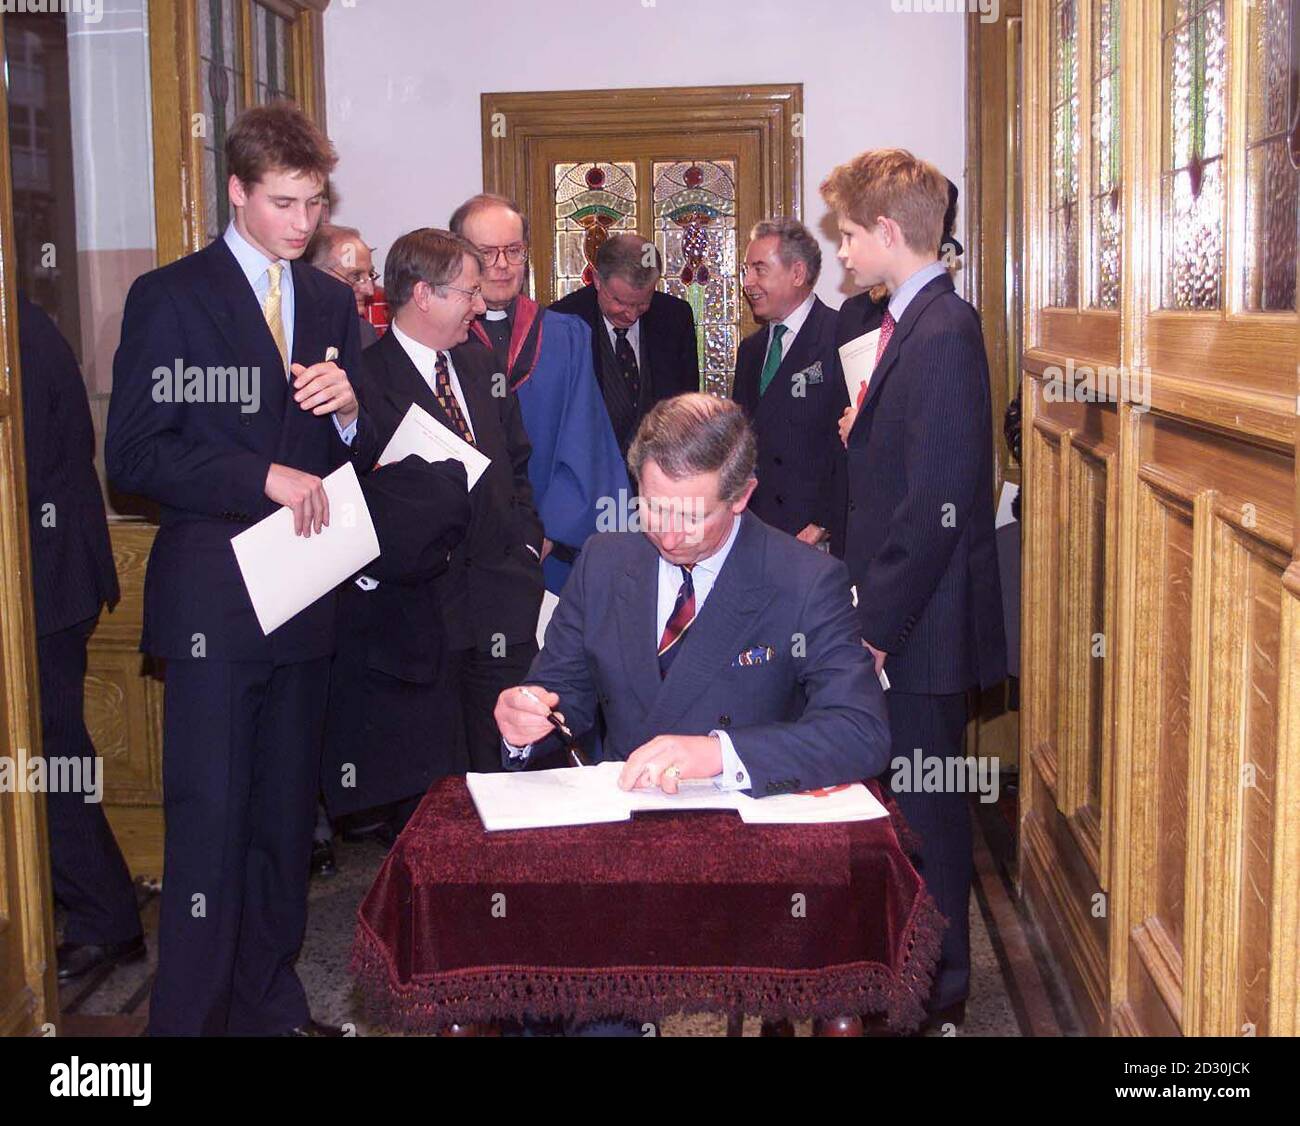 The Prince of Wales signs the visitors book at the Tabernacl Church in Hayes, Cardiff, where he attended a  millennium service, Sunday 2nd January 2000, accompanied by the princes William (left) and Harry (right). NPA/D Mirror Rota photo by Kent Gavin.  Stock Photo